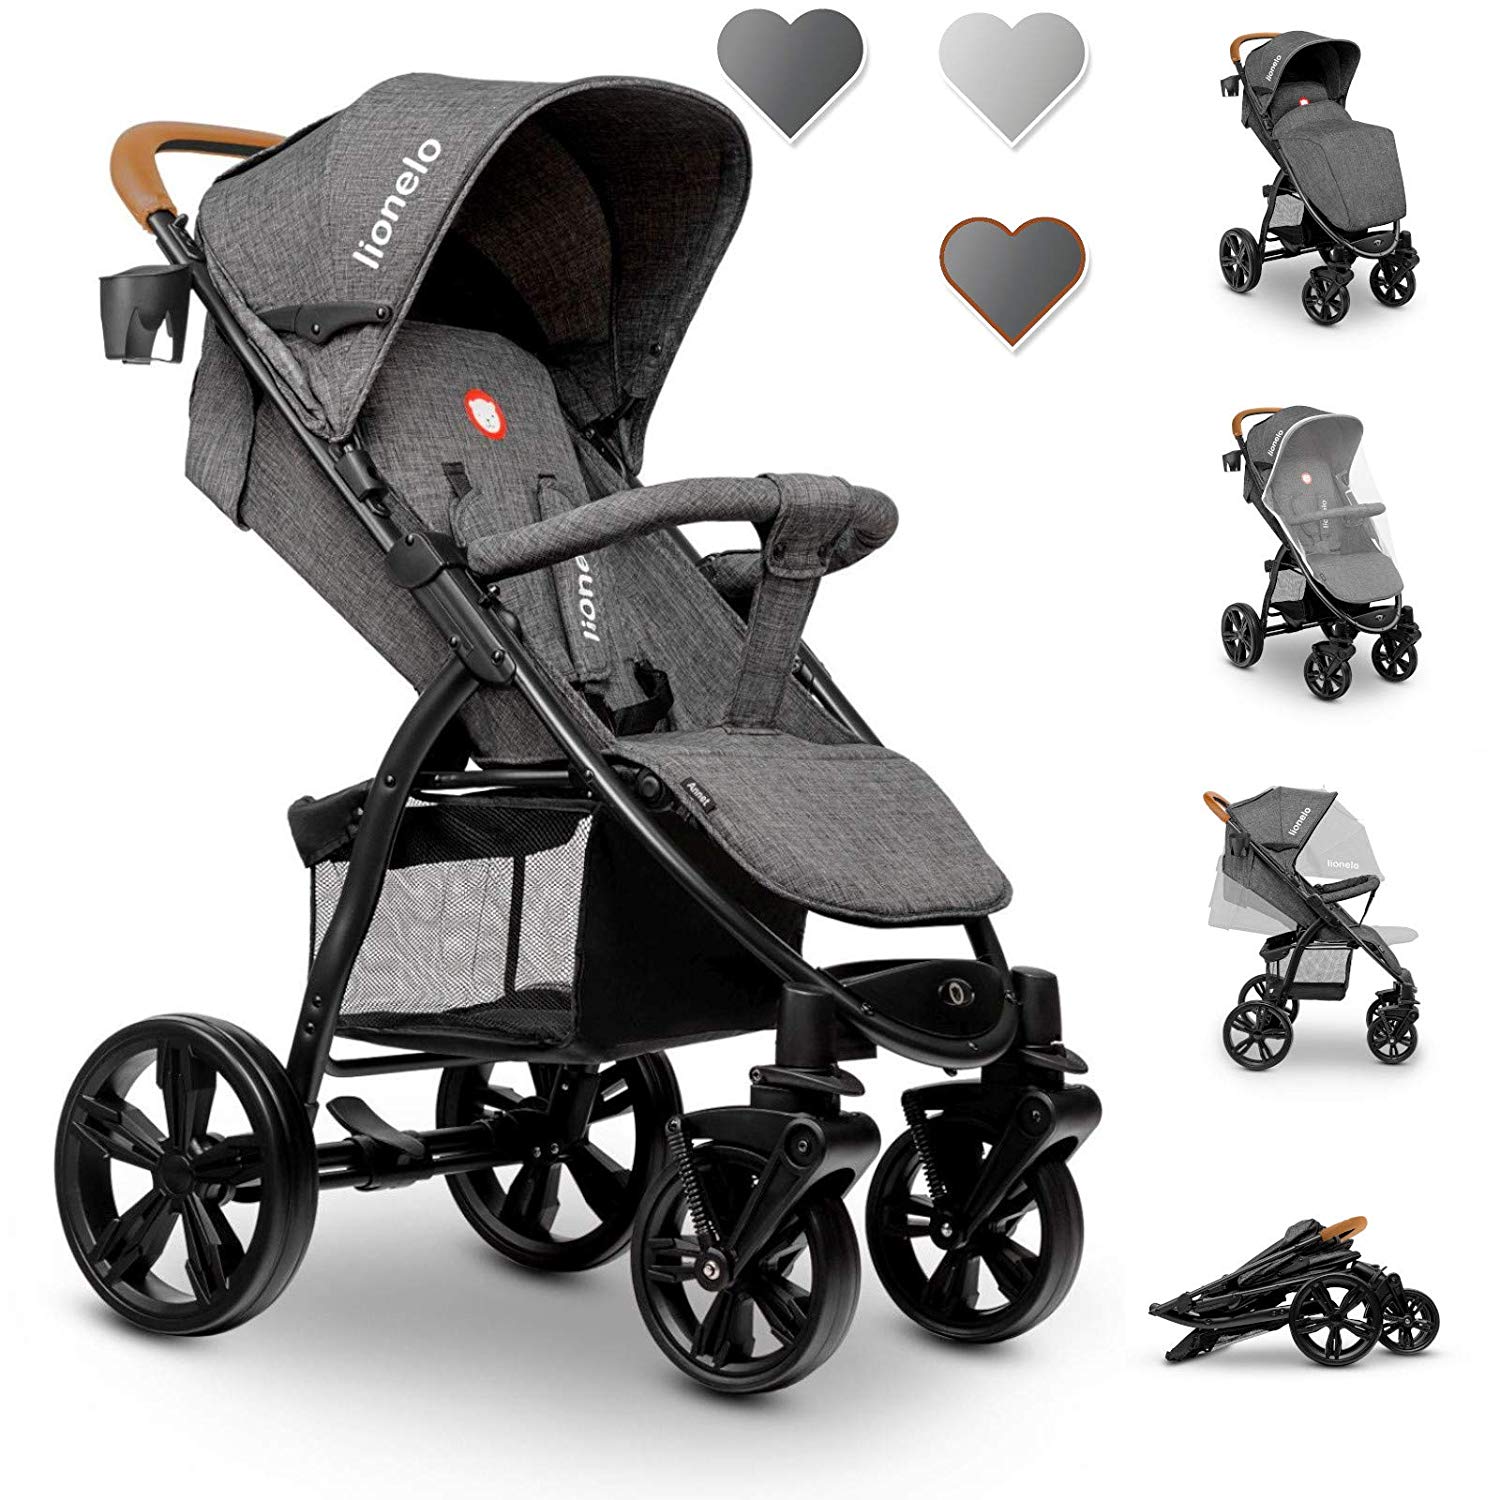 Lionelo Annet Pushchair with Reclining Function, Small Foldable EVA Foam Wheels, Mosquito Net Foot Cover, Drink Holder Basket